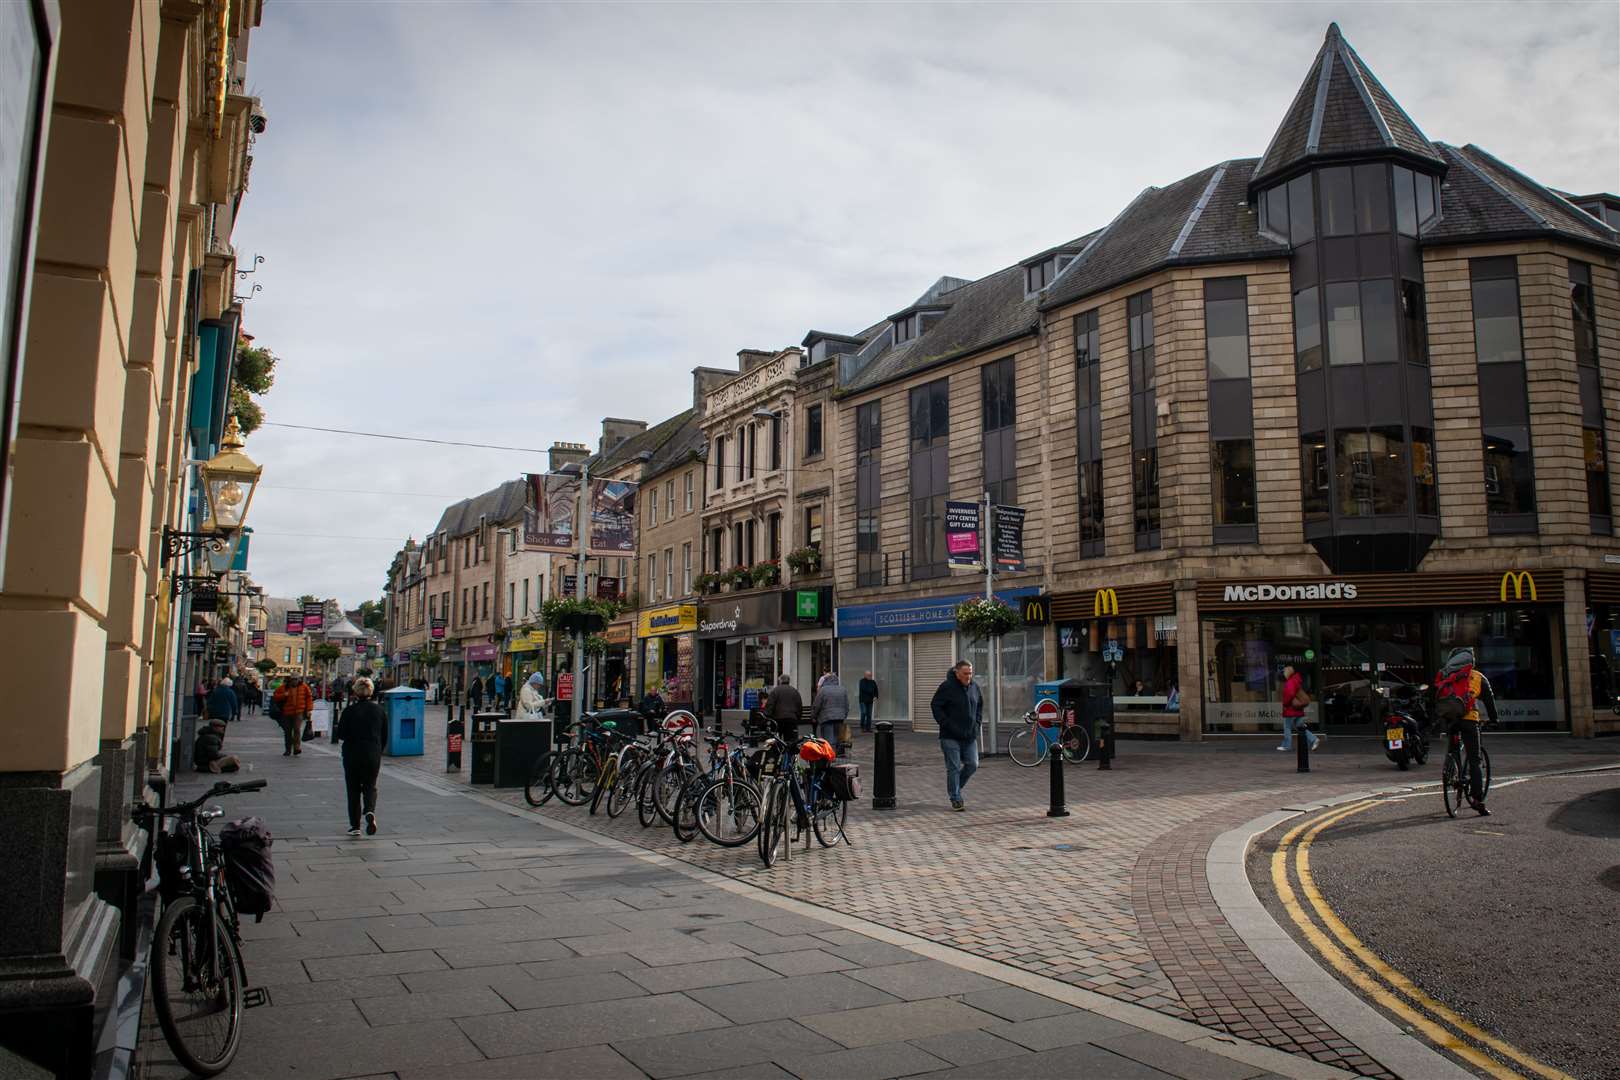 The incident took place in Inverness High Street.